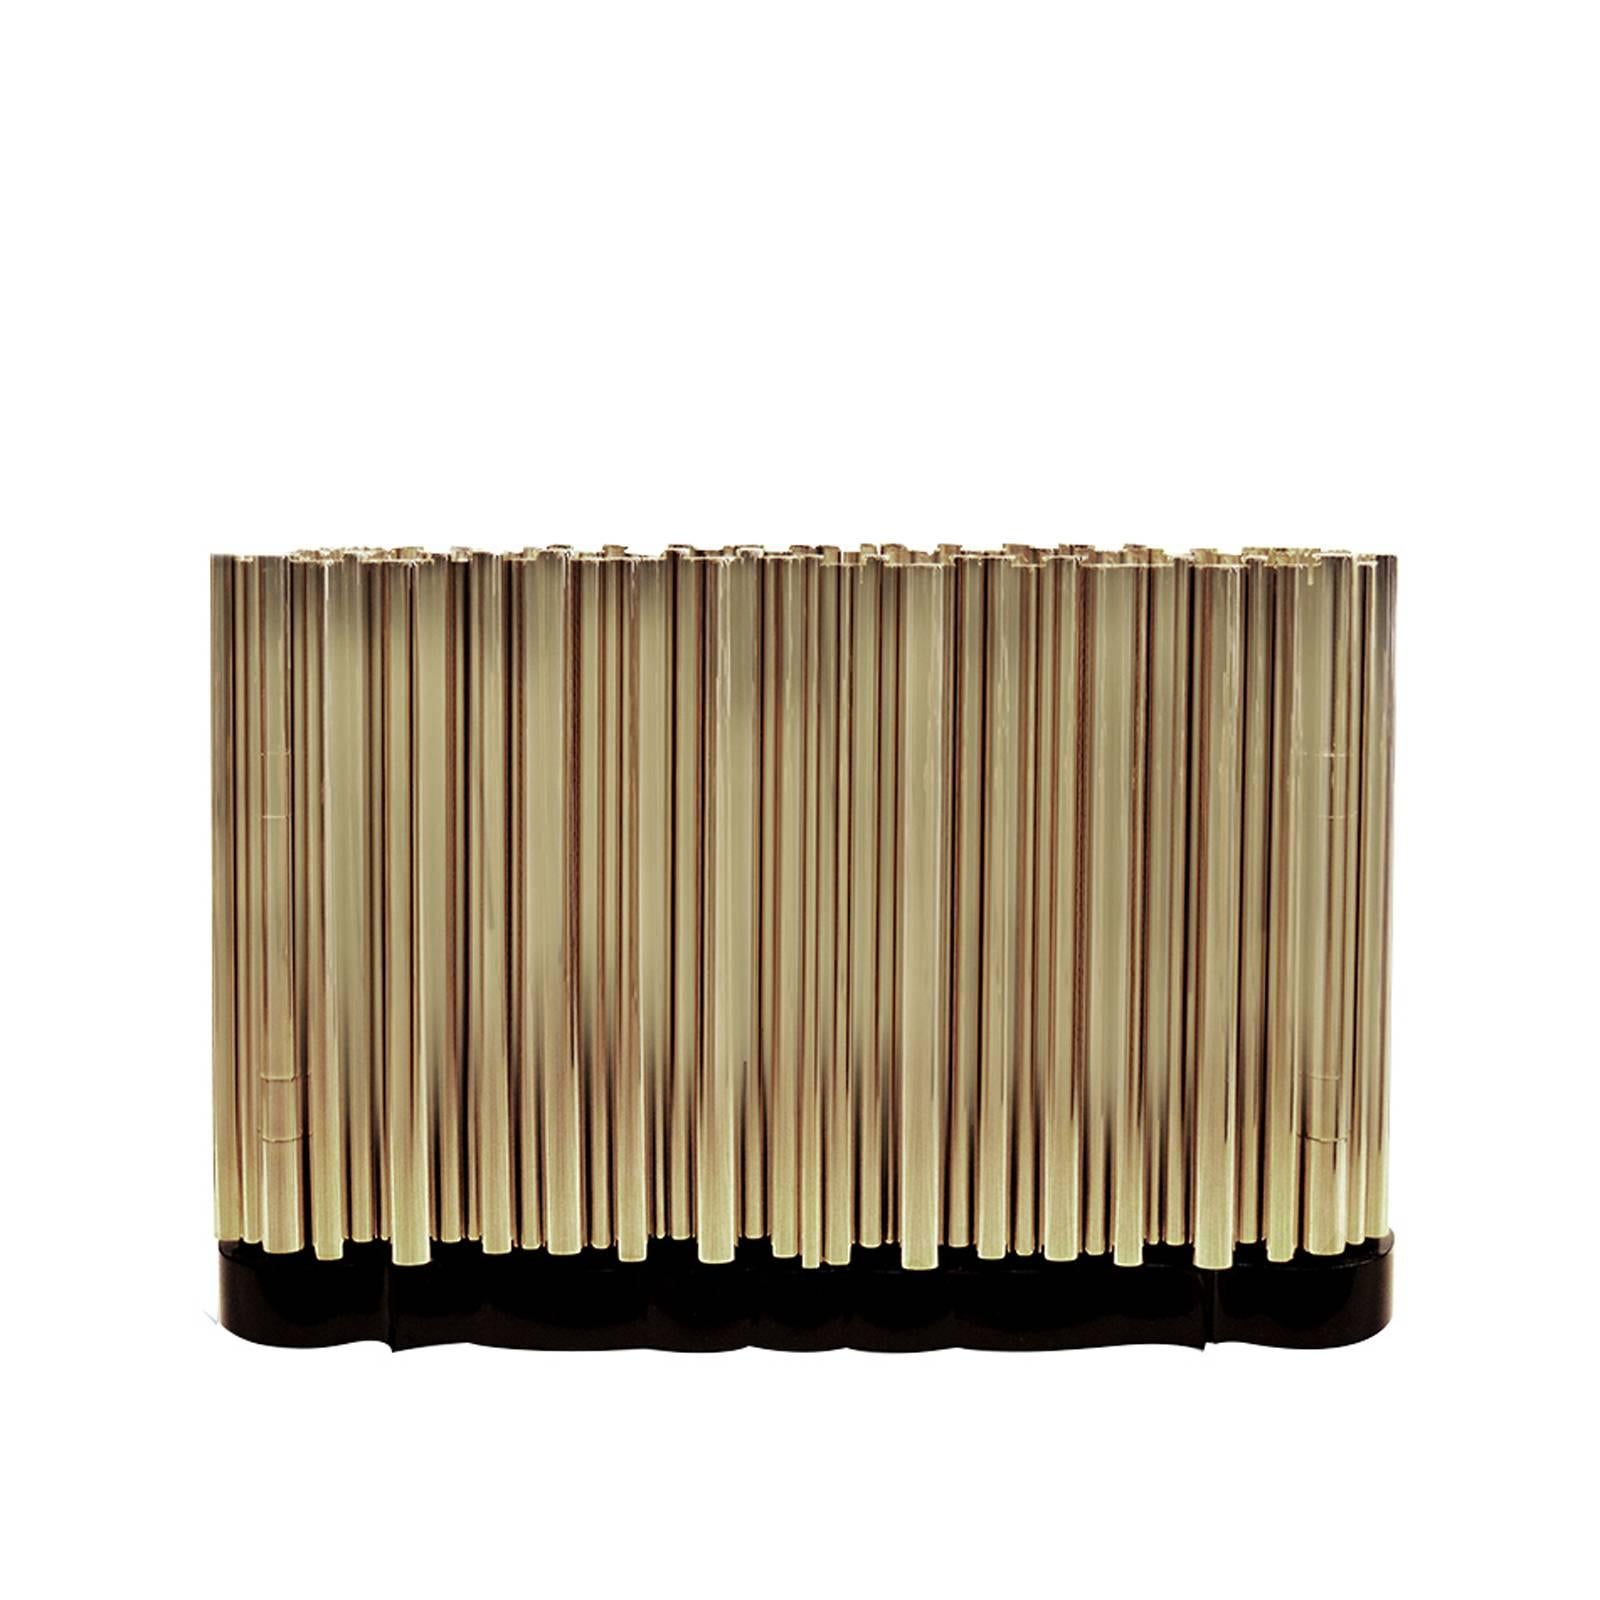 Nightstand brass tubes with polished brass tubes gold-plated
that wrap an exotic wooden structure, creating a clever juxtaposition.

 